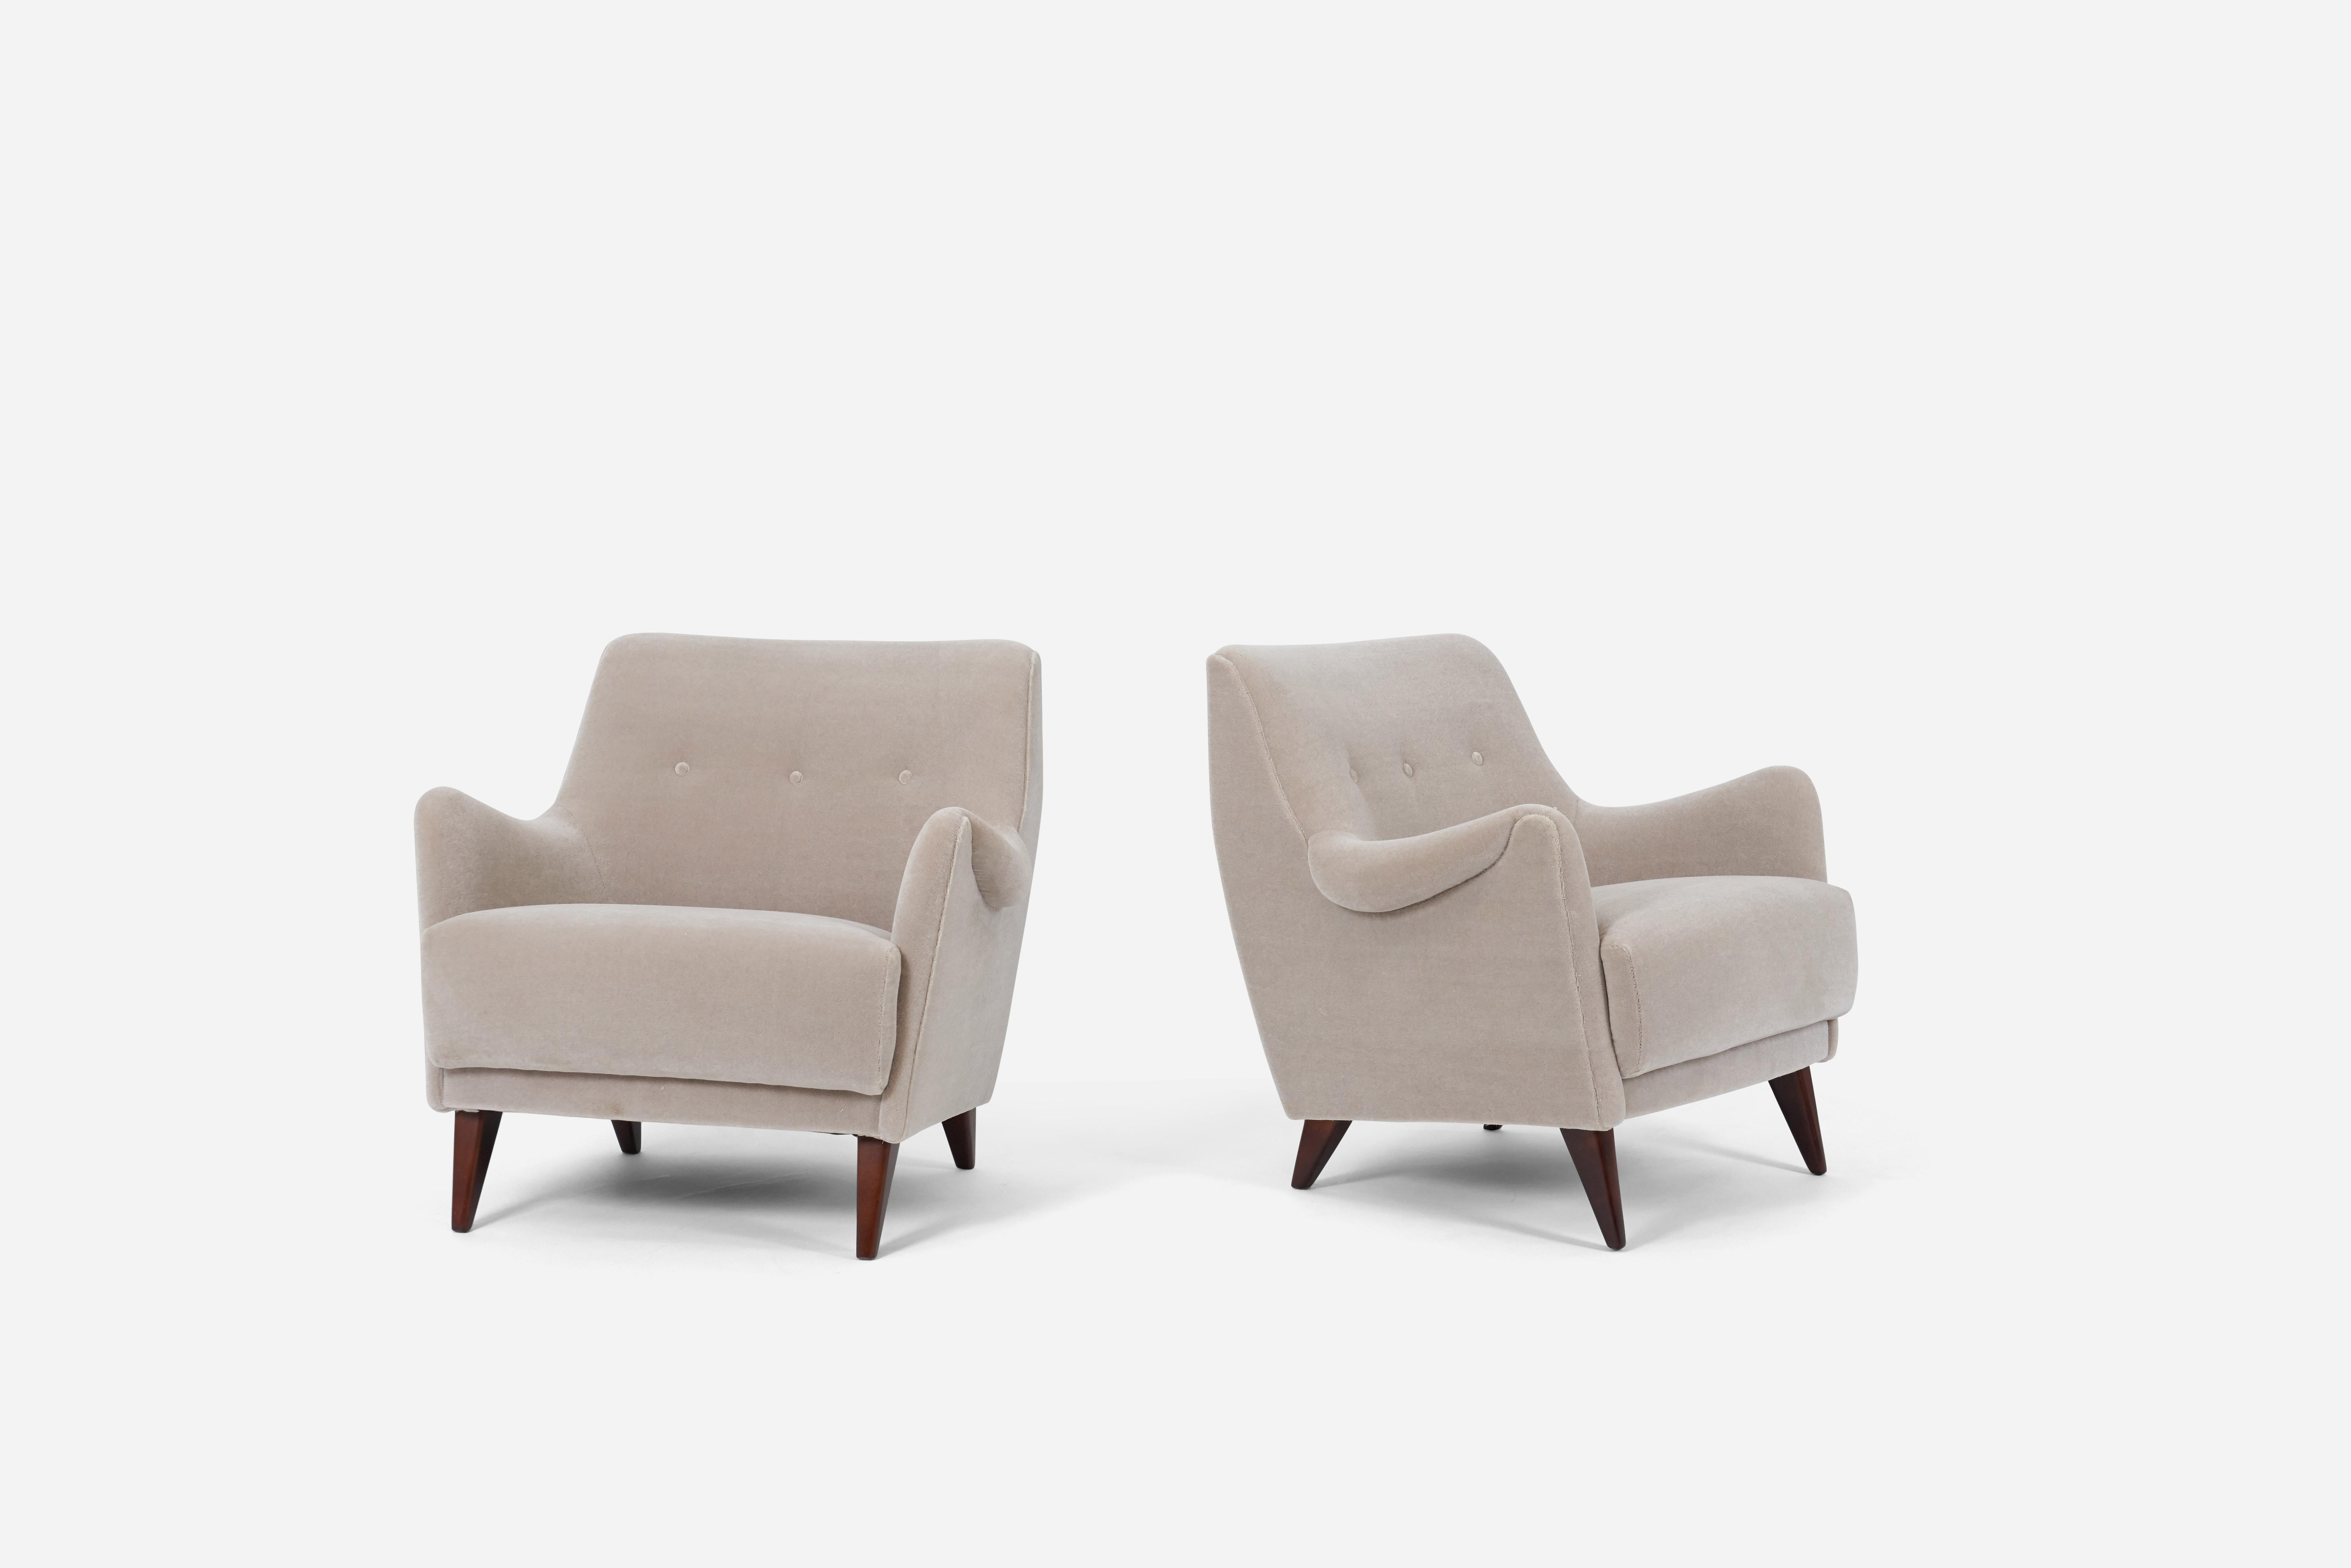 Beautiful pair of Italian Mid-Century Modern lounge chairs, circa 1950s. Elegant form in style of Ice Parisi and Gio Ponti. Fully restored. New mohair upholstery.